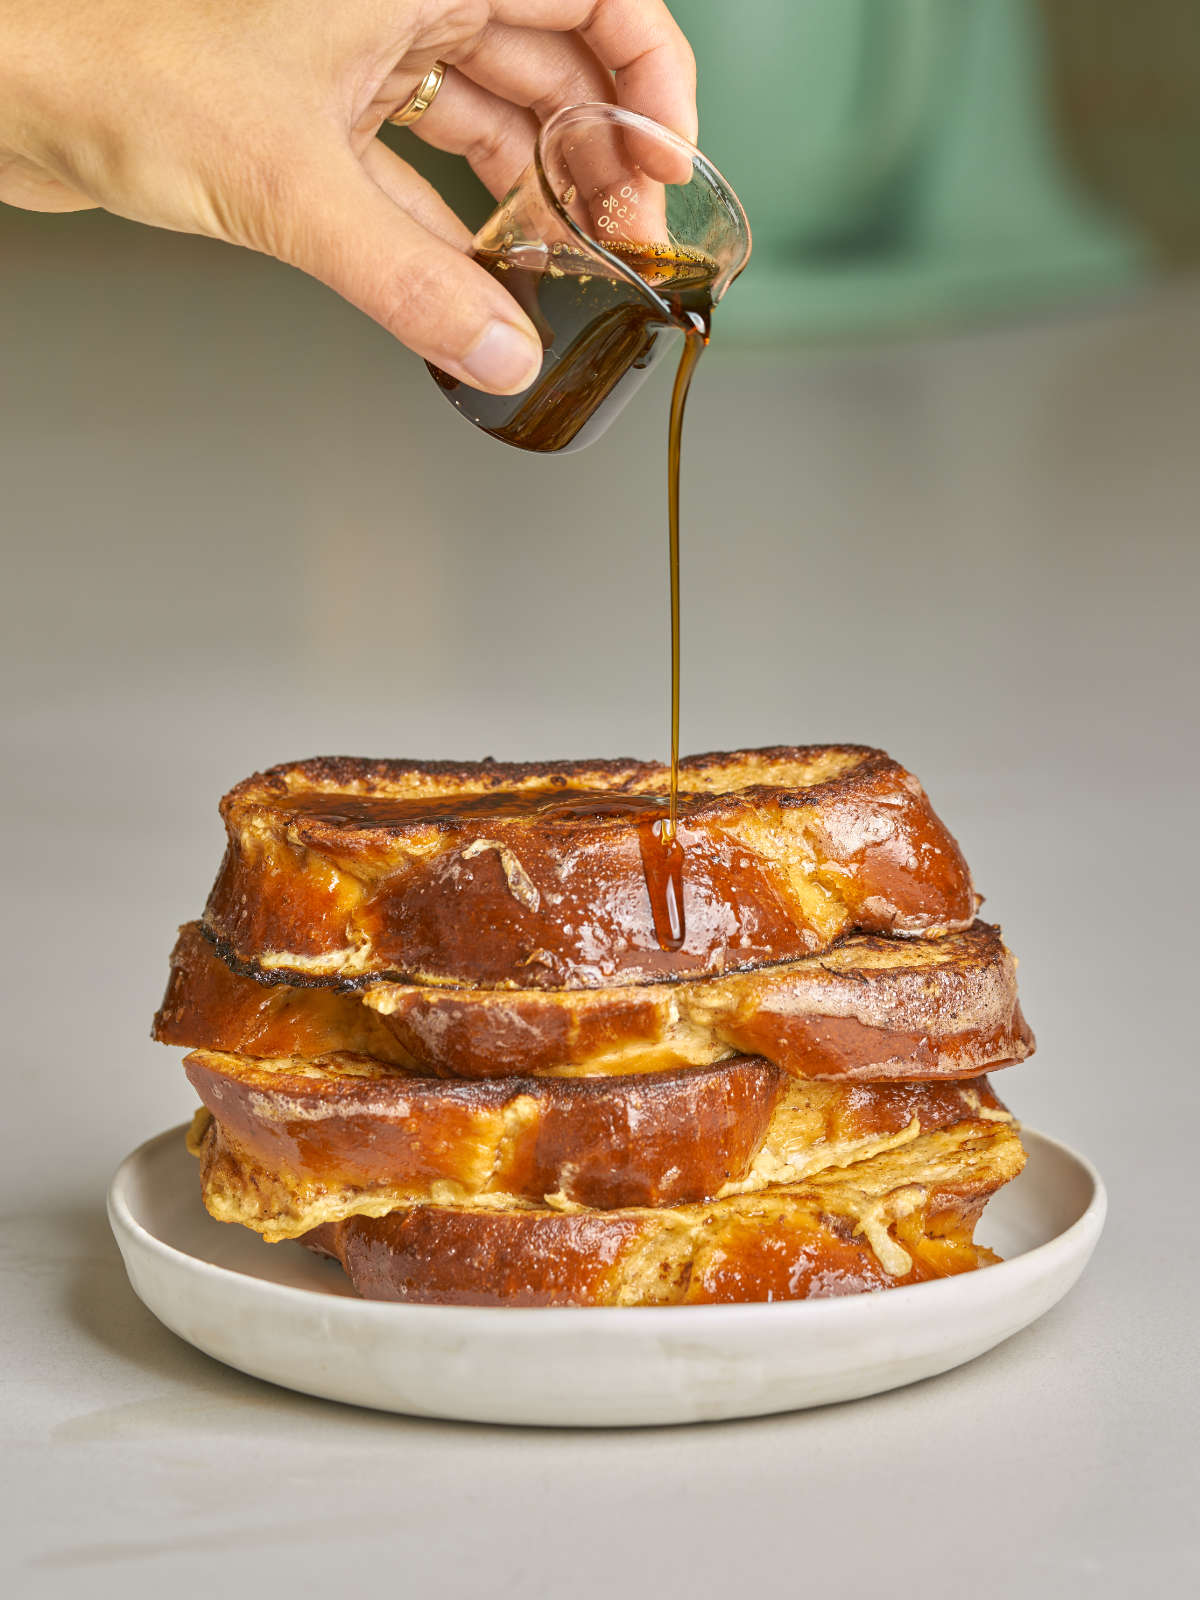 A woman's hand drizzling maple syrup from a small glass beaker onto a stack of challah French toast.